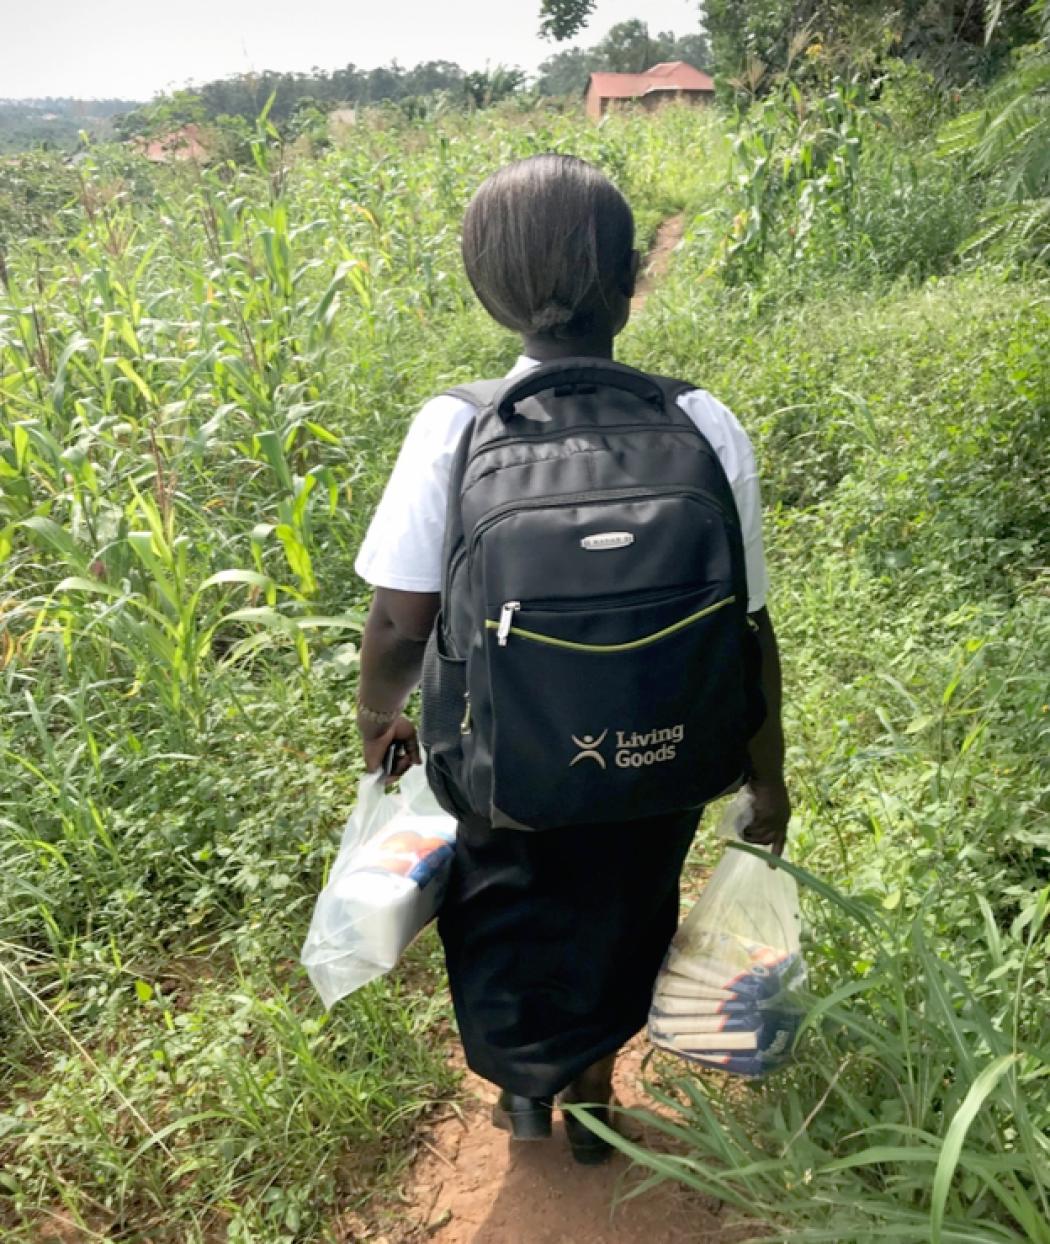 Harriet, a community health worker in rural Uganda, walks through her village carrying medicines and supplies. Photo by Judith Ssesse for Living Goods.